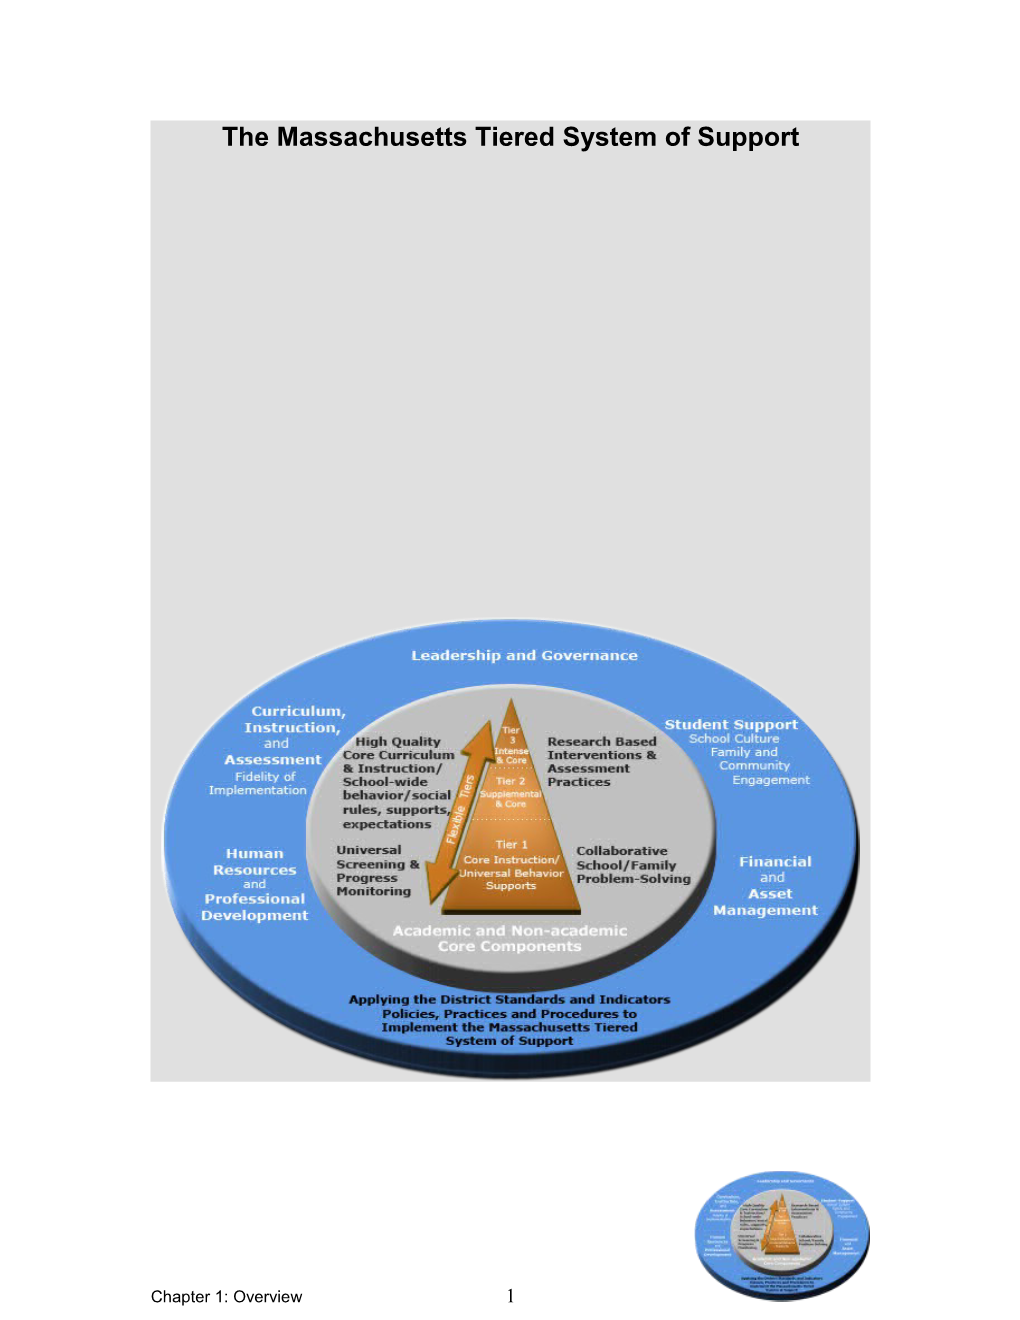 Chapter 1 - the Massachusetts Tiered System of Support (MTSS)